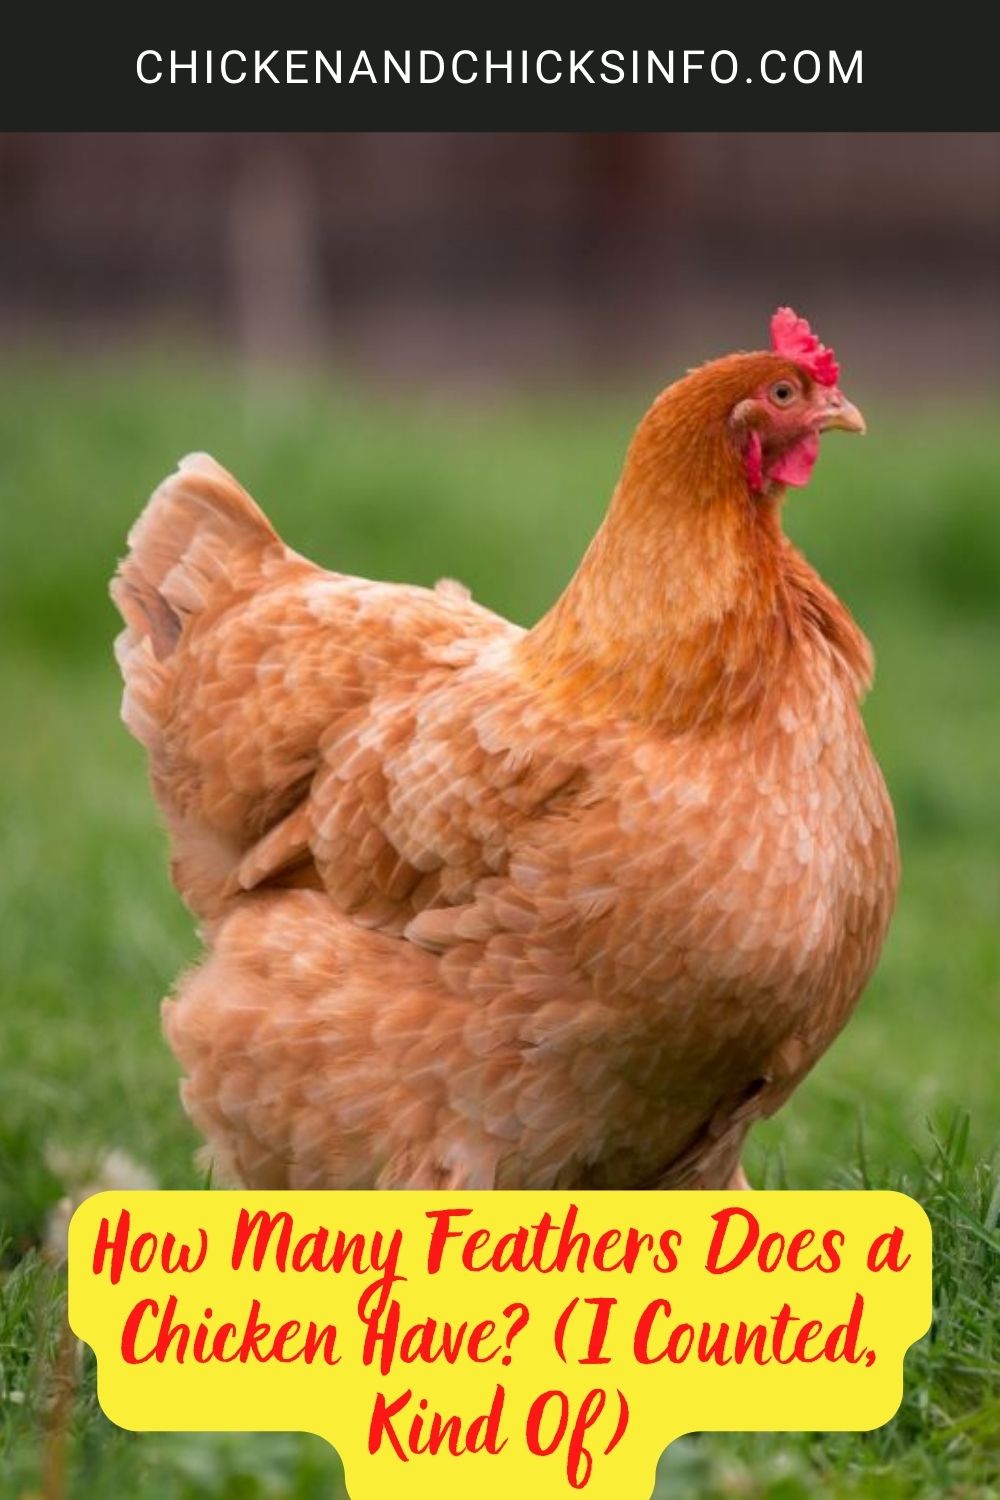 How Many Feathers Does a Chicken Have? (I Counted, Kind Of) poster.
